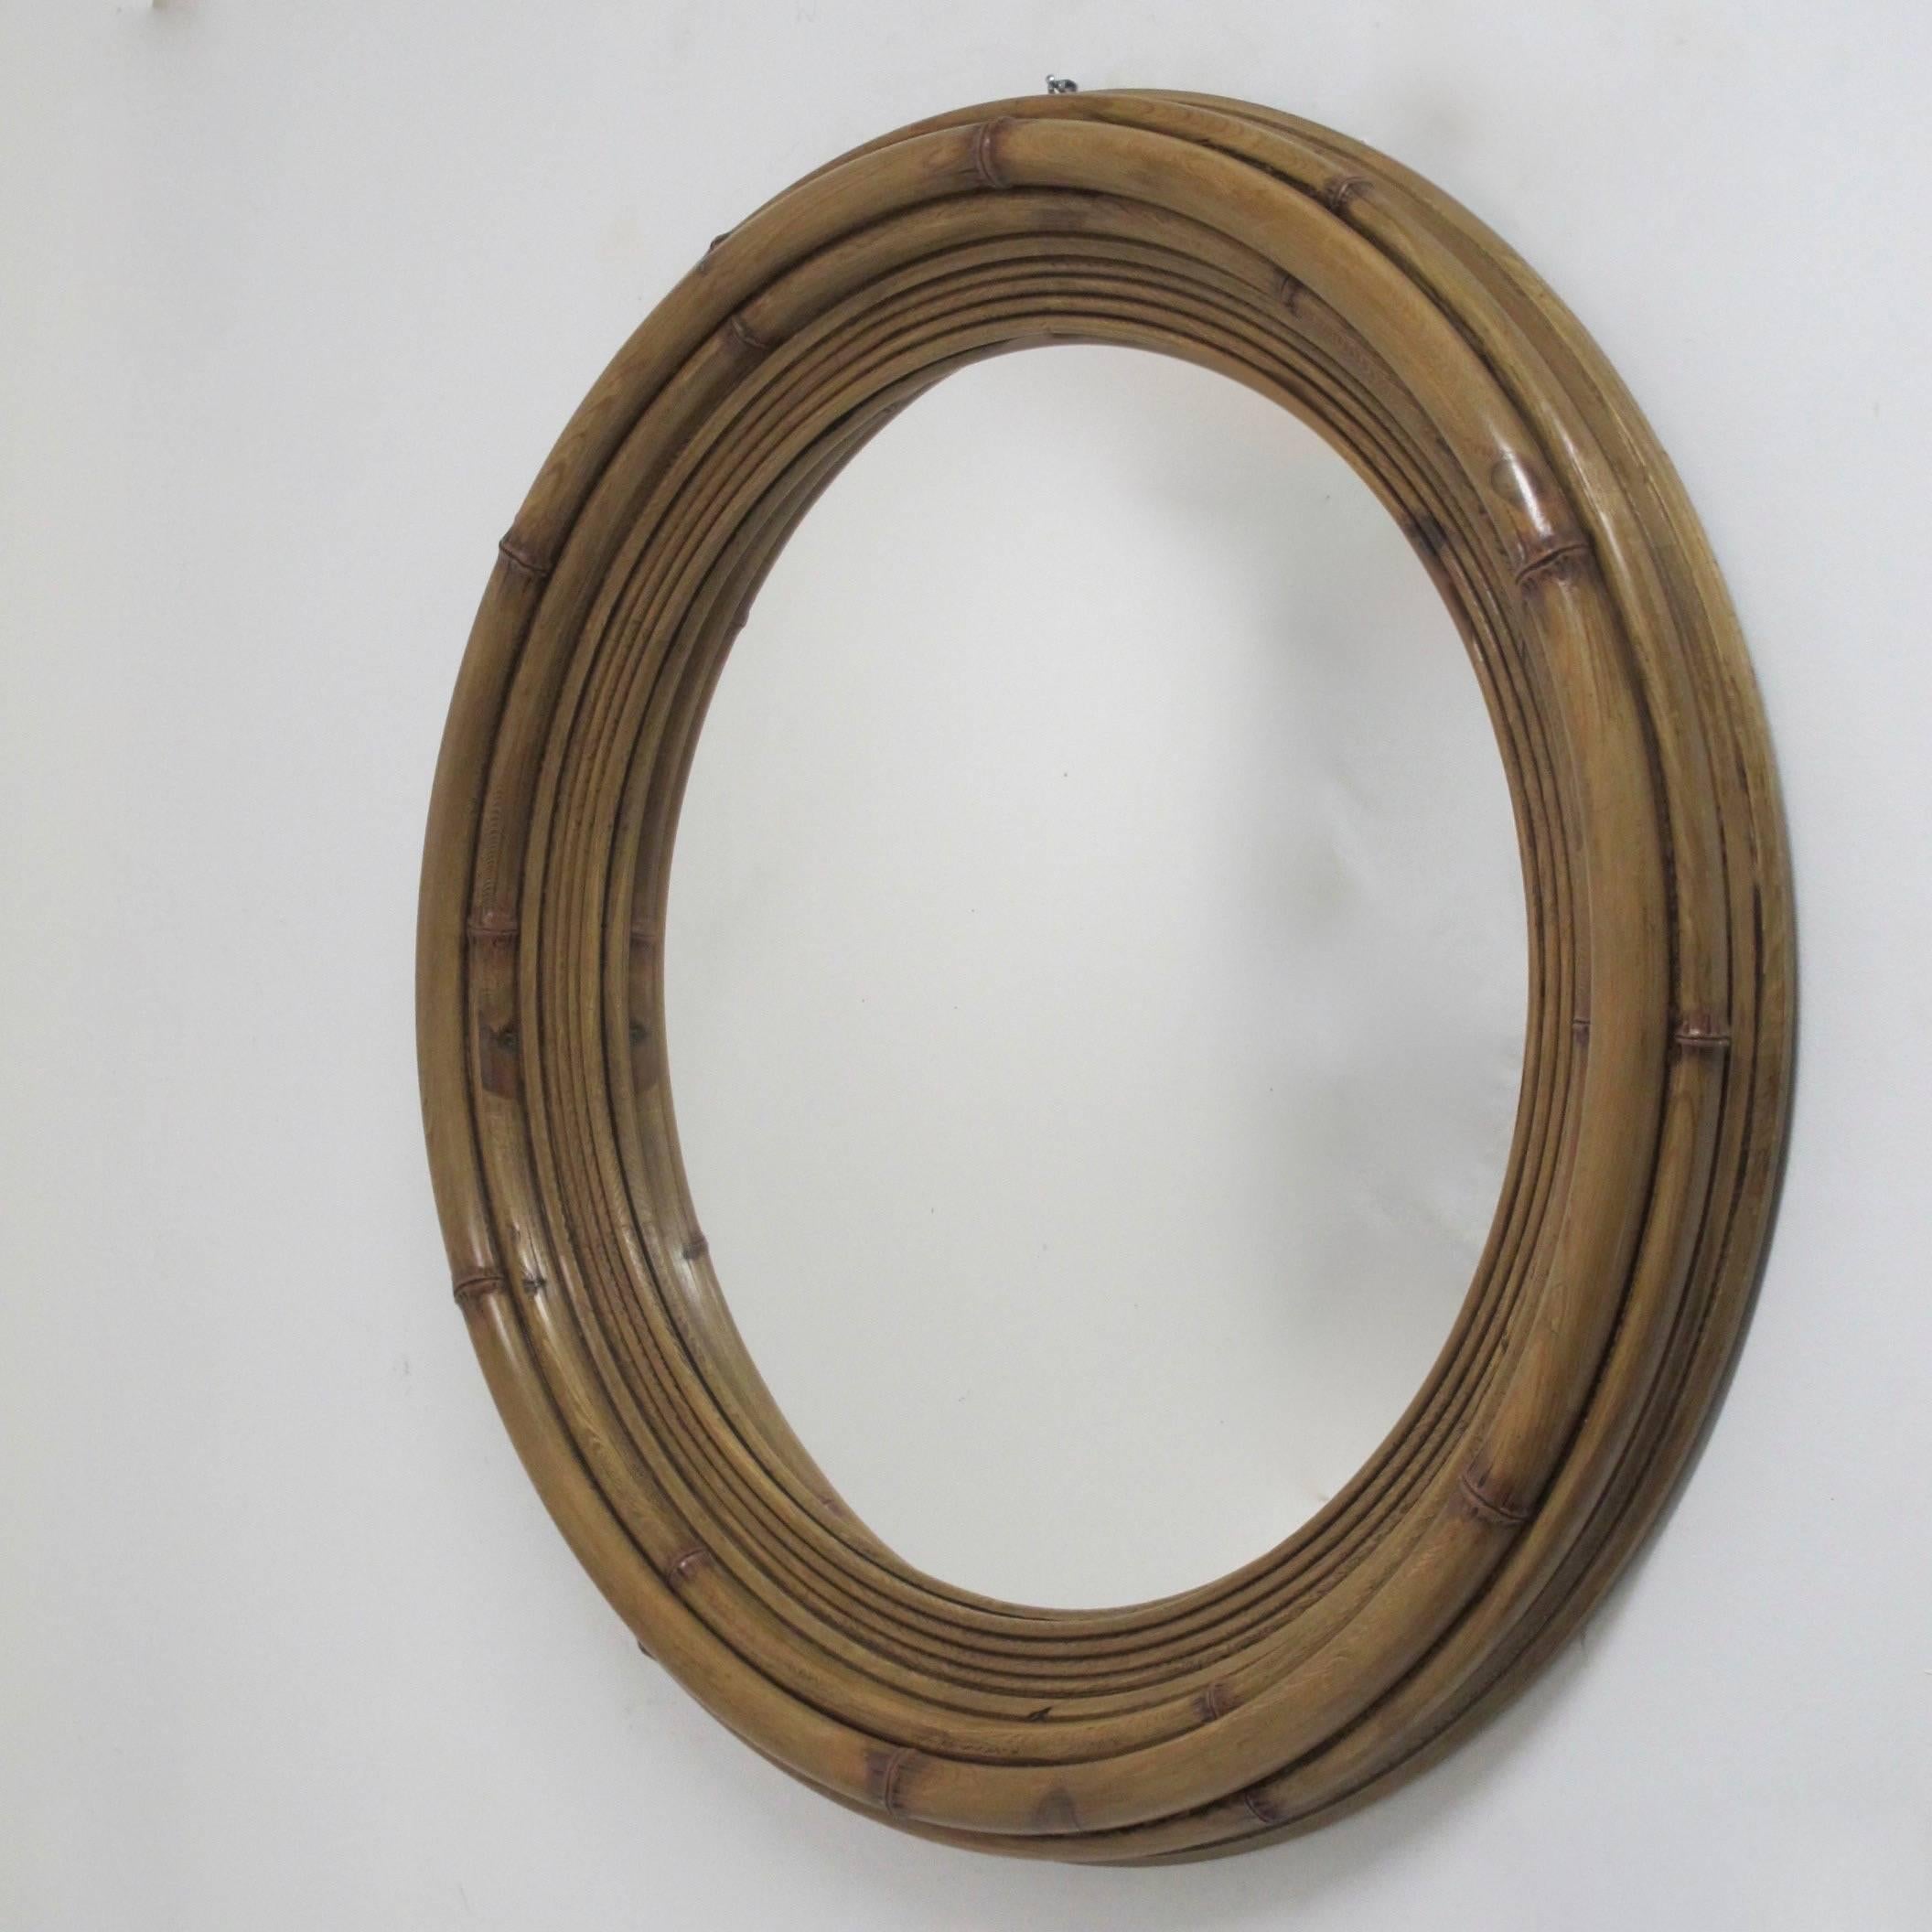 A large carved pine wood frame (made to look like bamboo) with convex mirror.